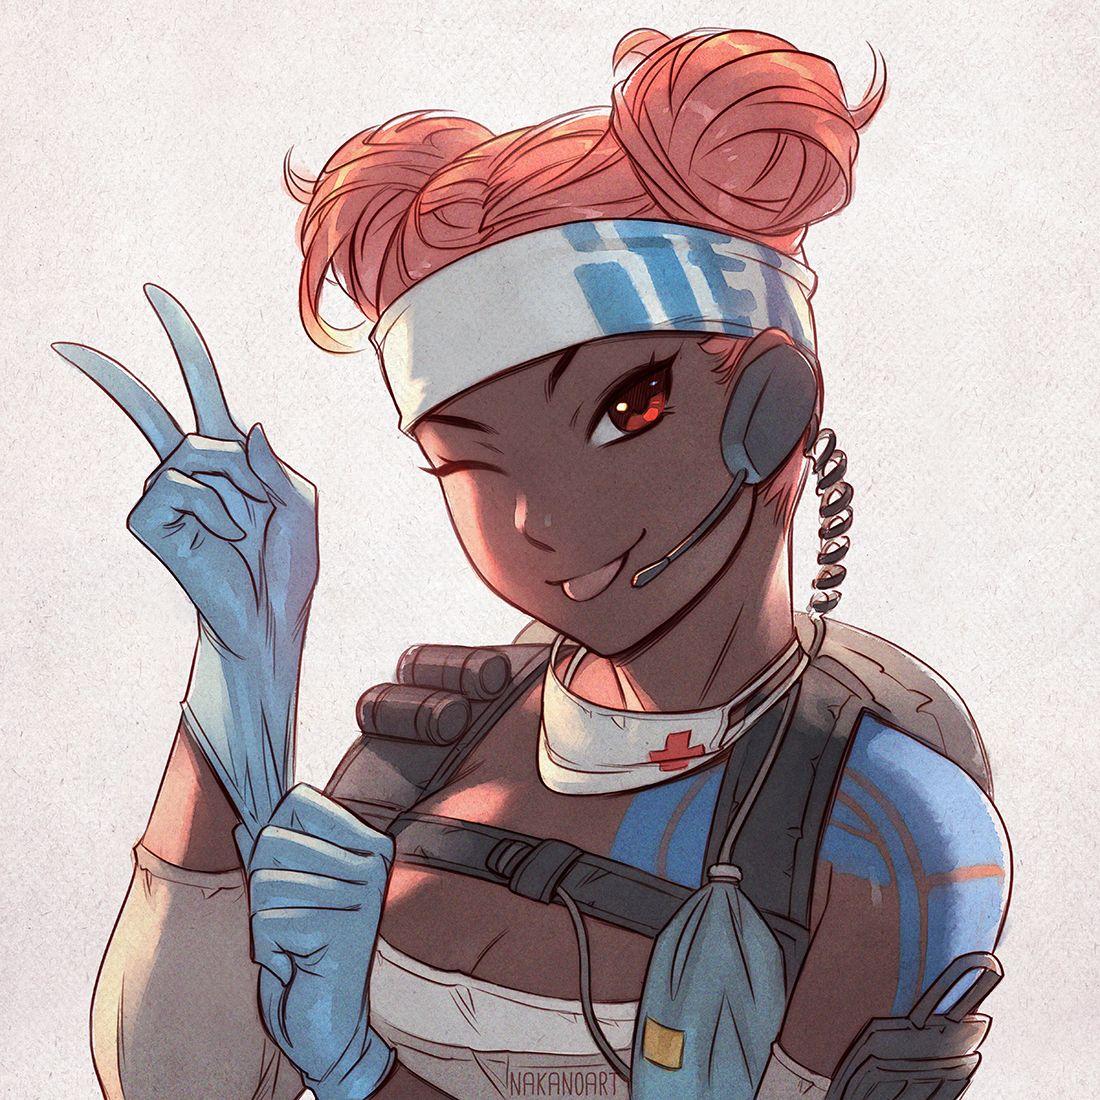 nakanoart you played Apex Legends yet? Also